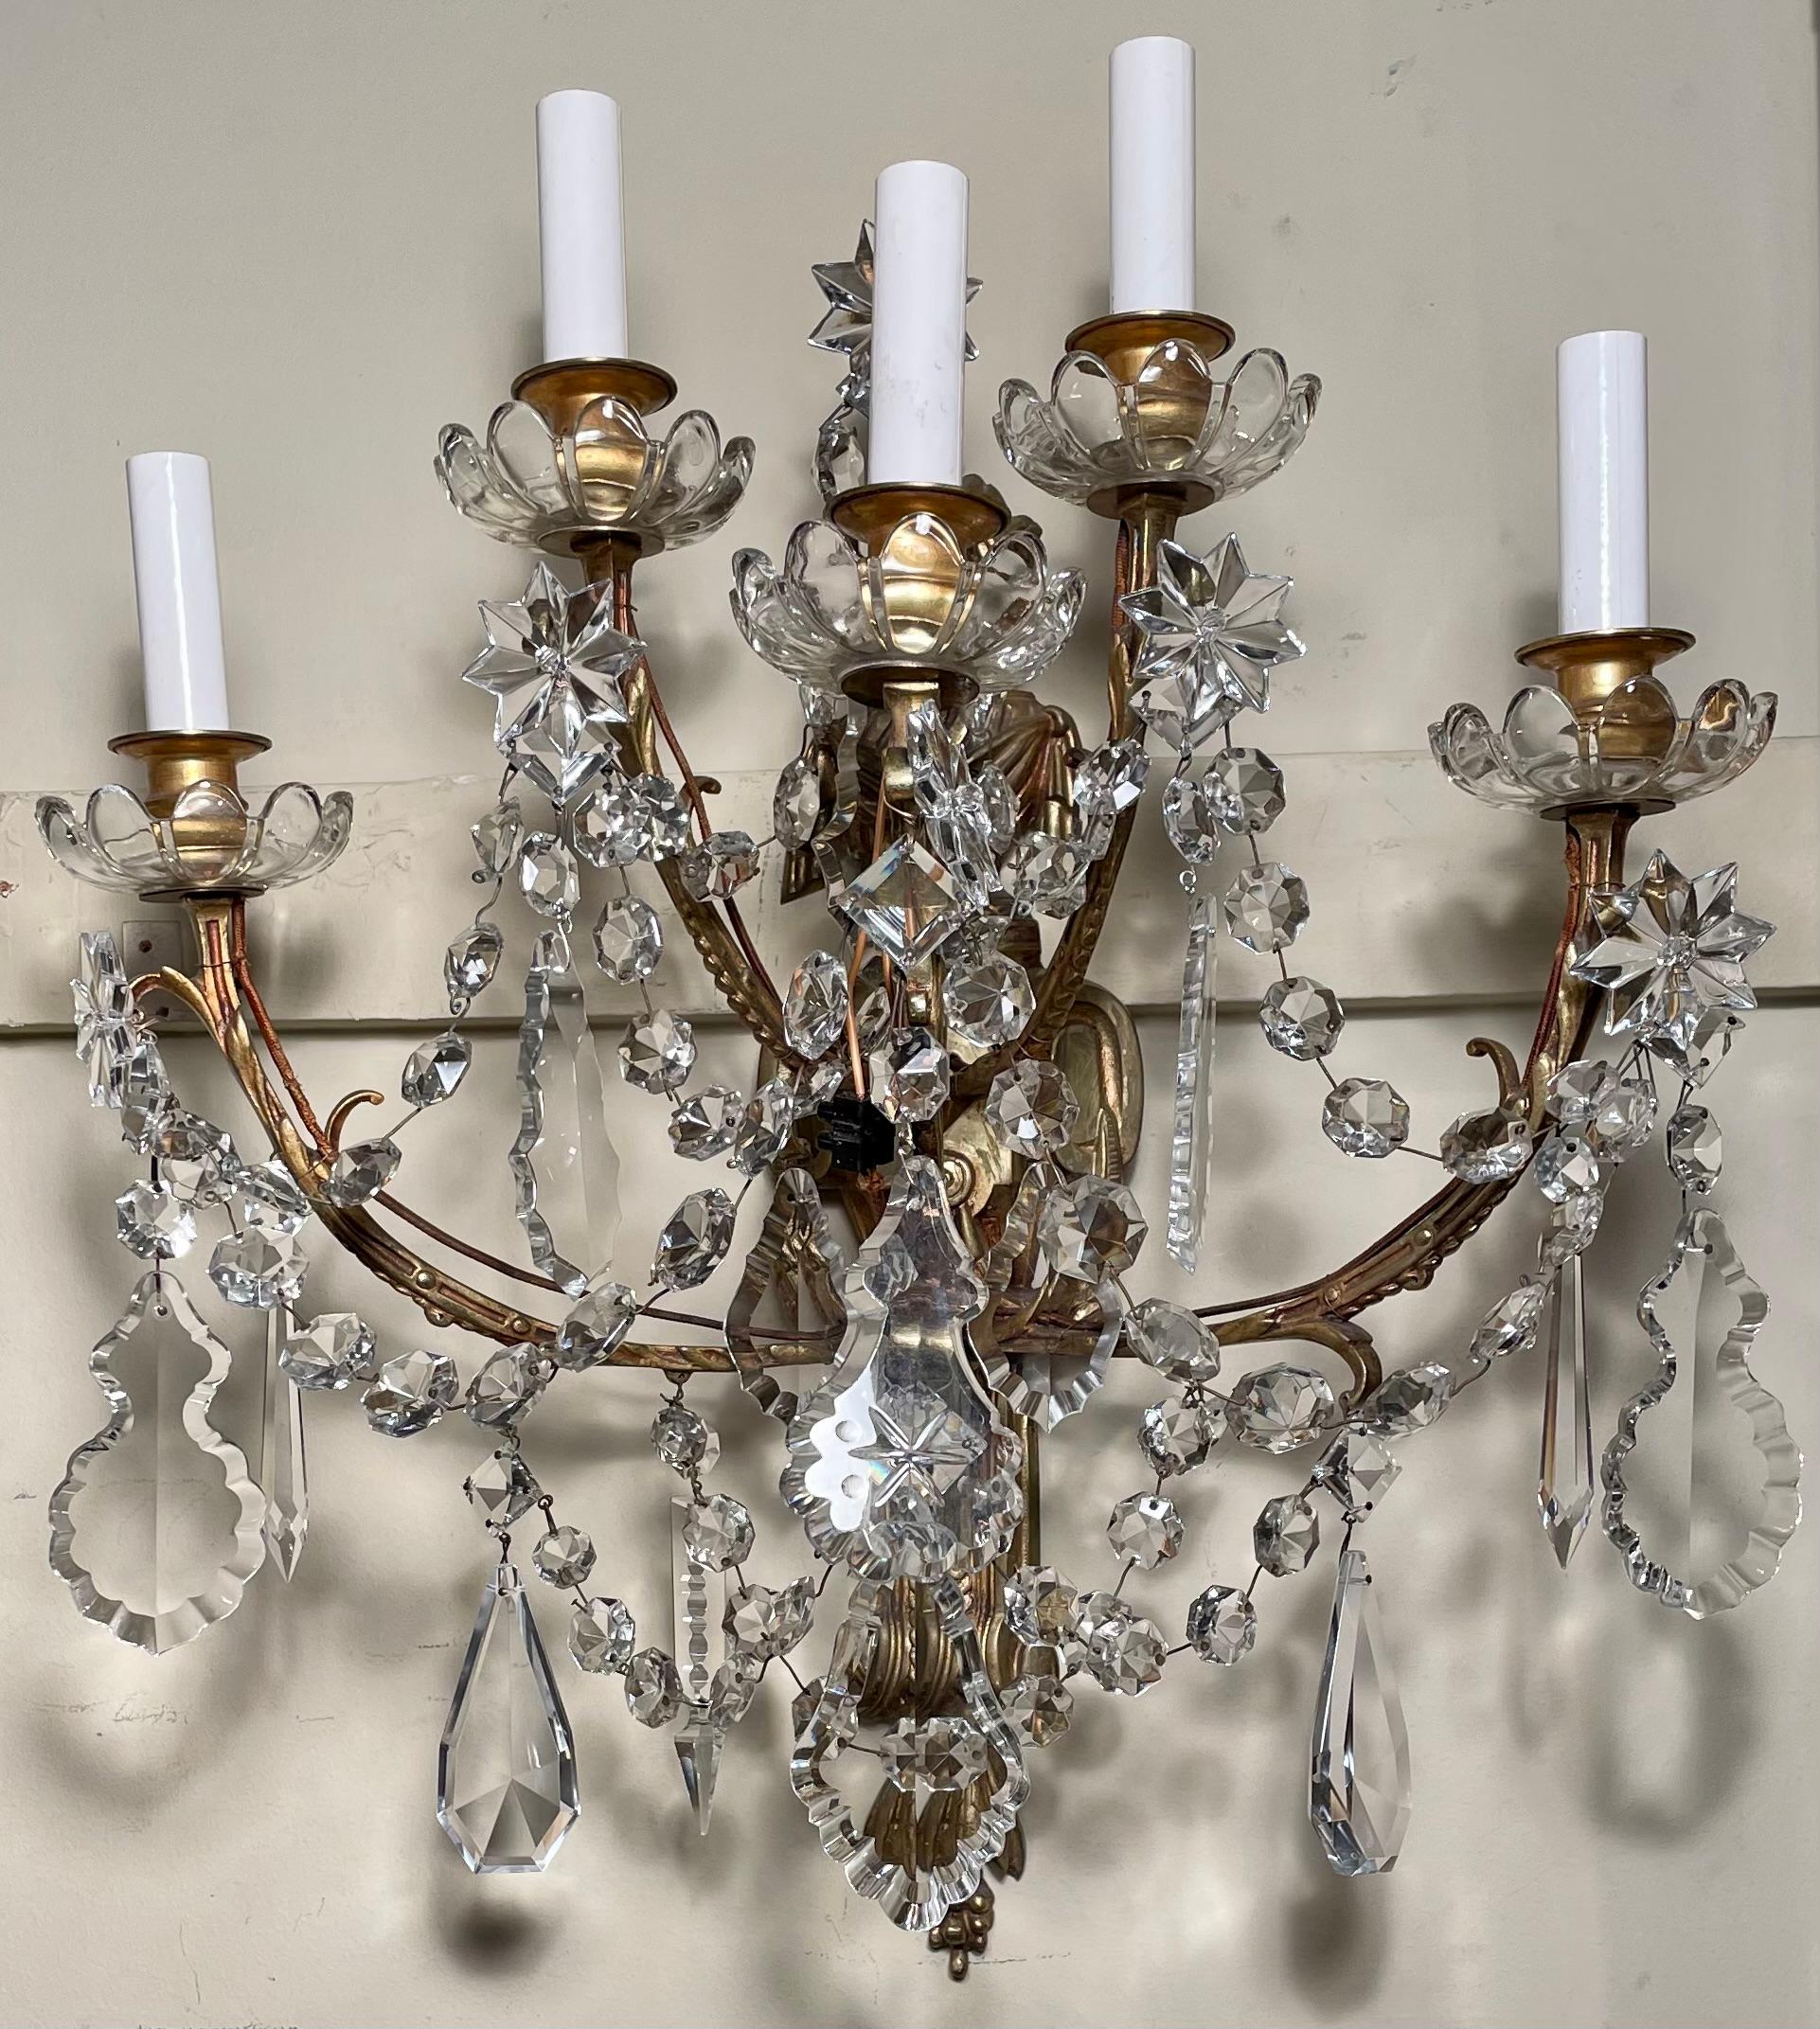 Pair antique French cut crystal and gold bronze five-light sconces, Circa 1890-1910.